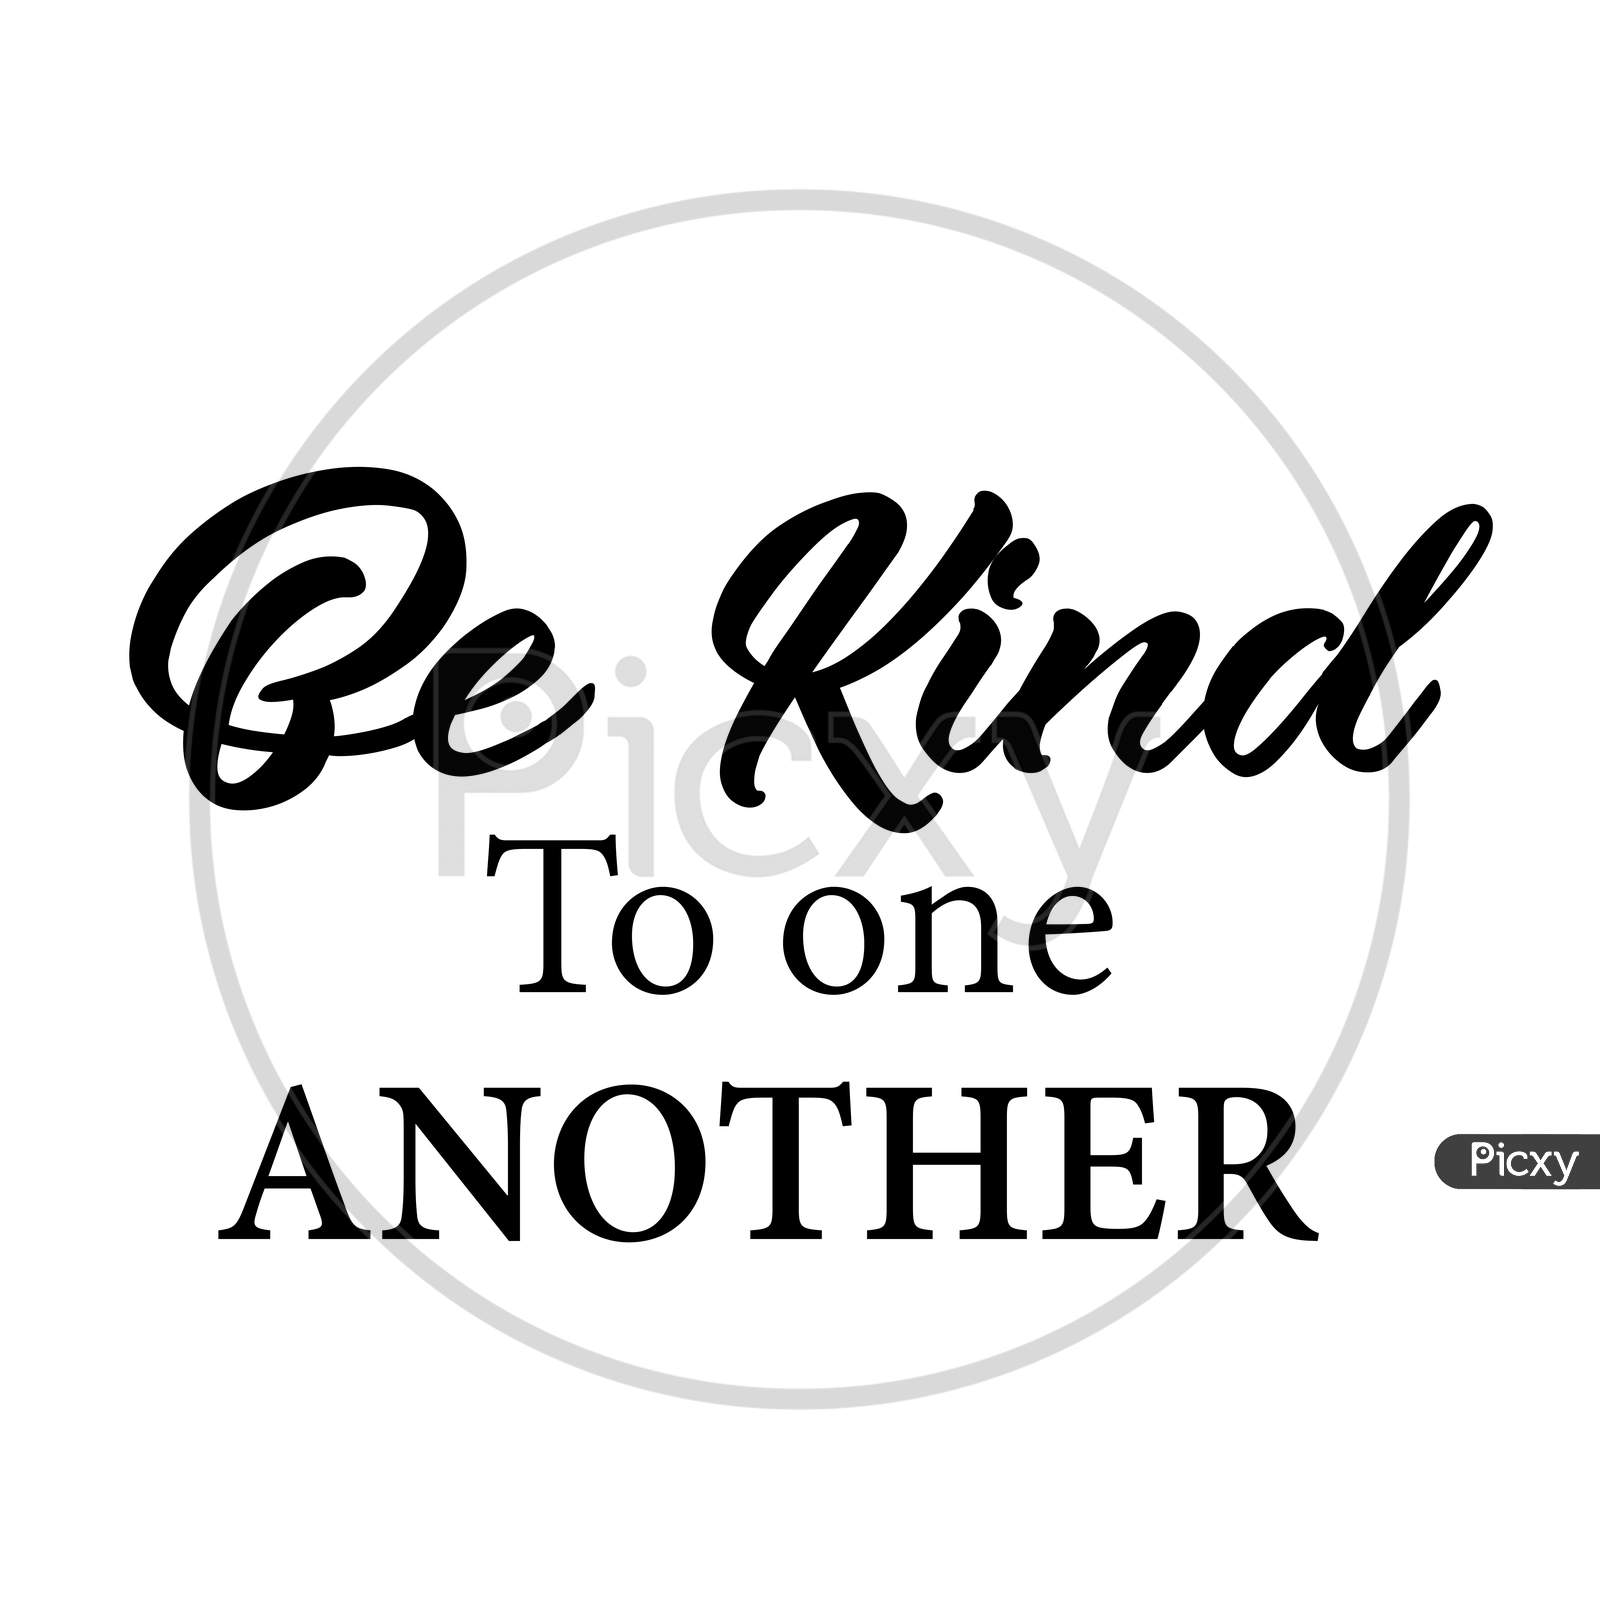 Biblical Phrase - Be kind to one another